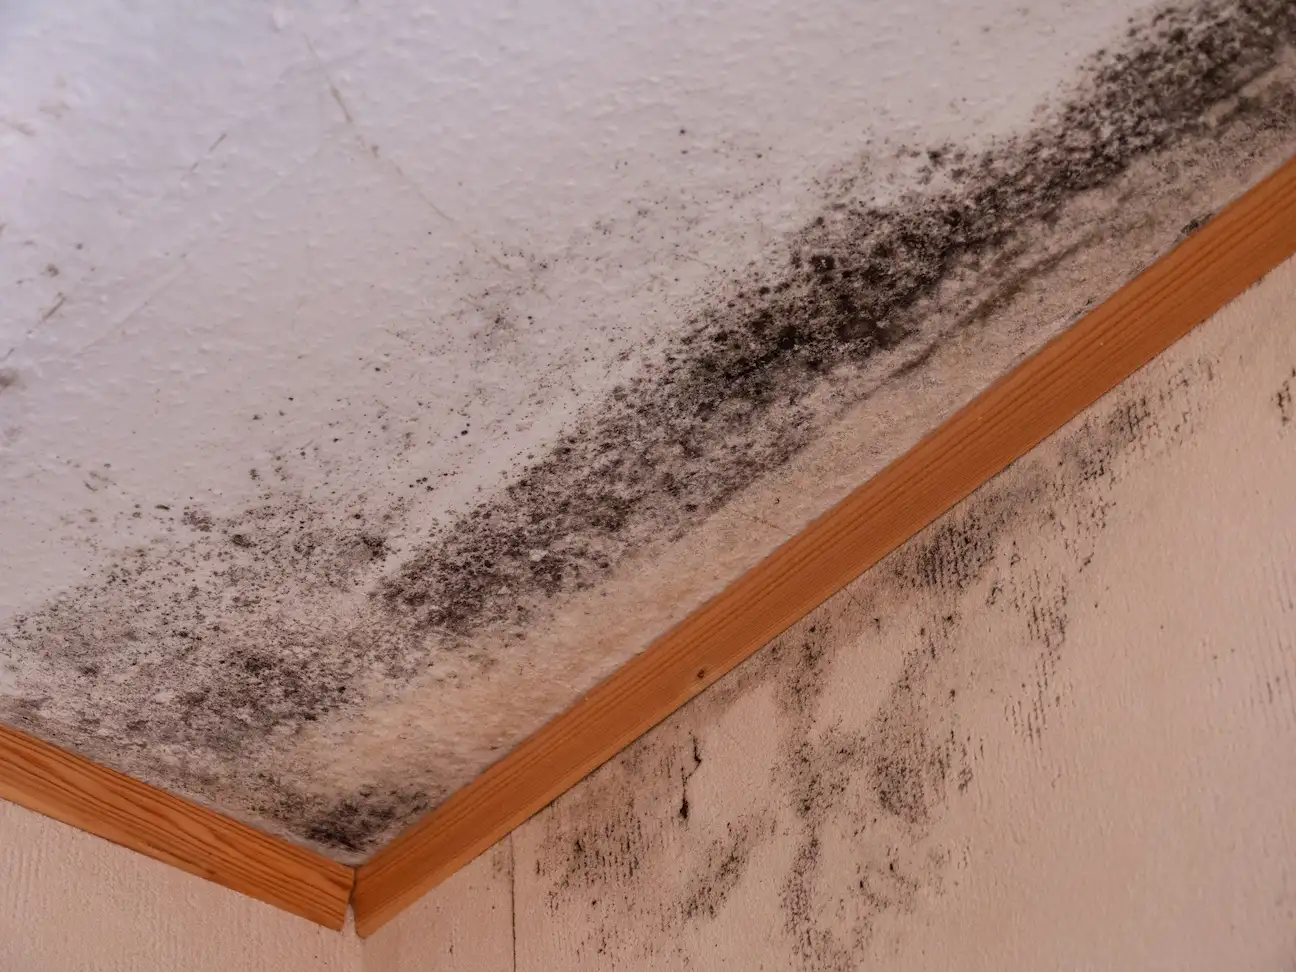 Mold Remediation Company in Bel Air CA